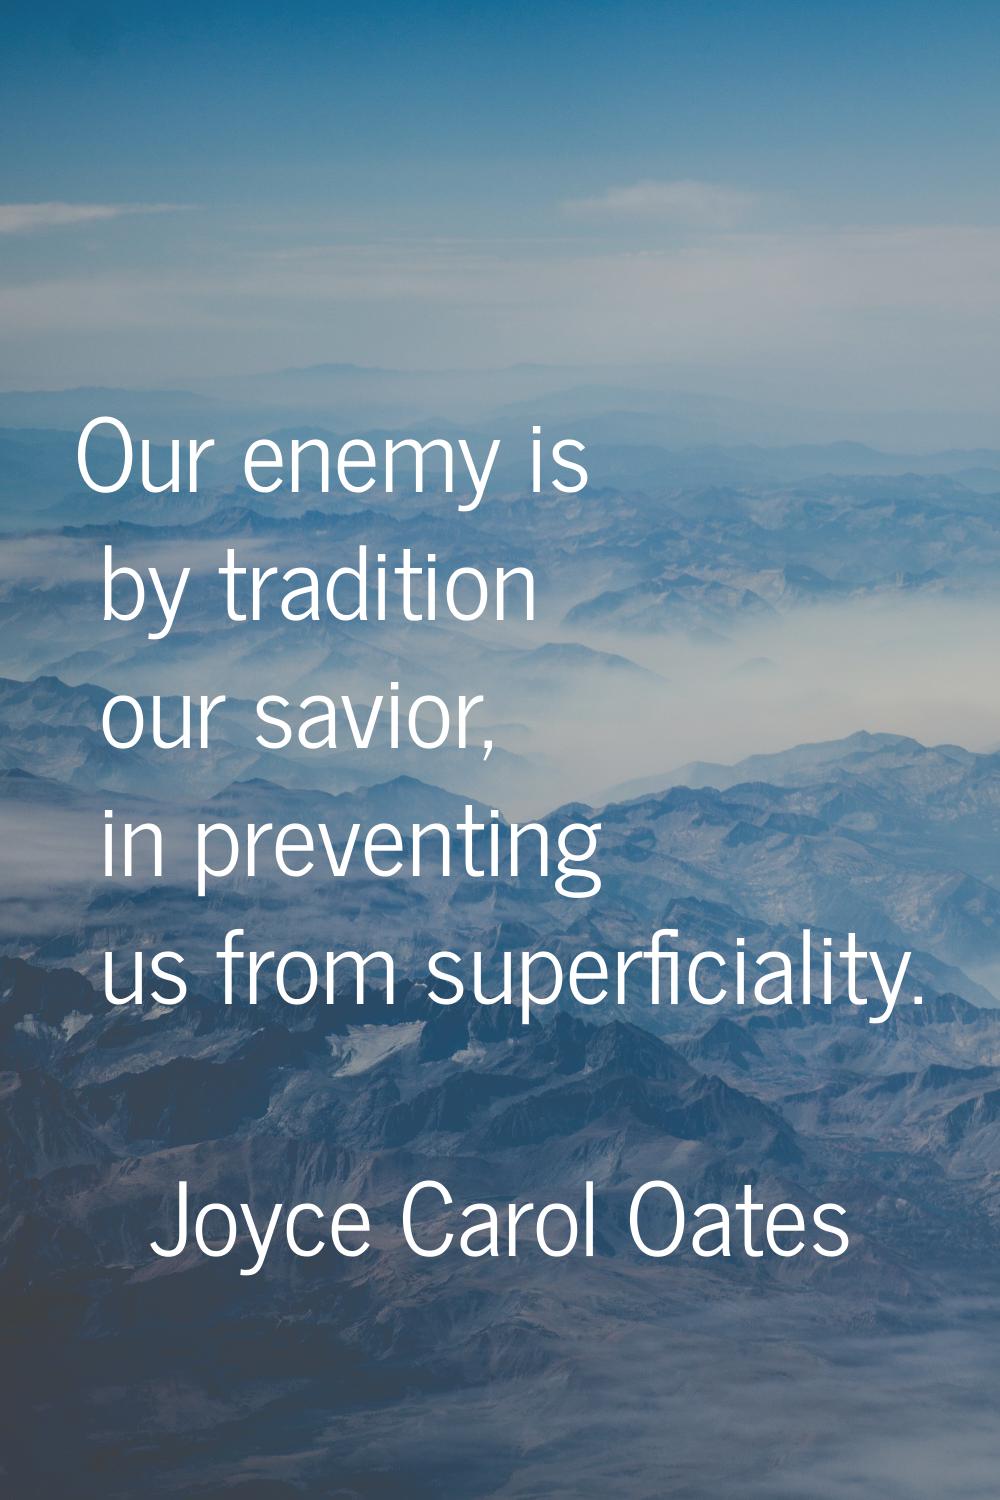 Our enemy is by tradition our savior, in preventing us from superficiality.